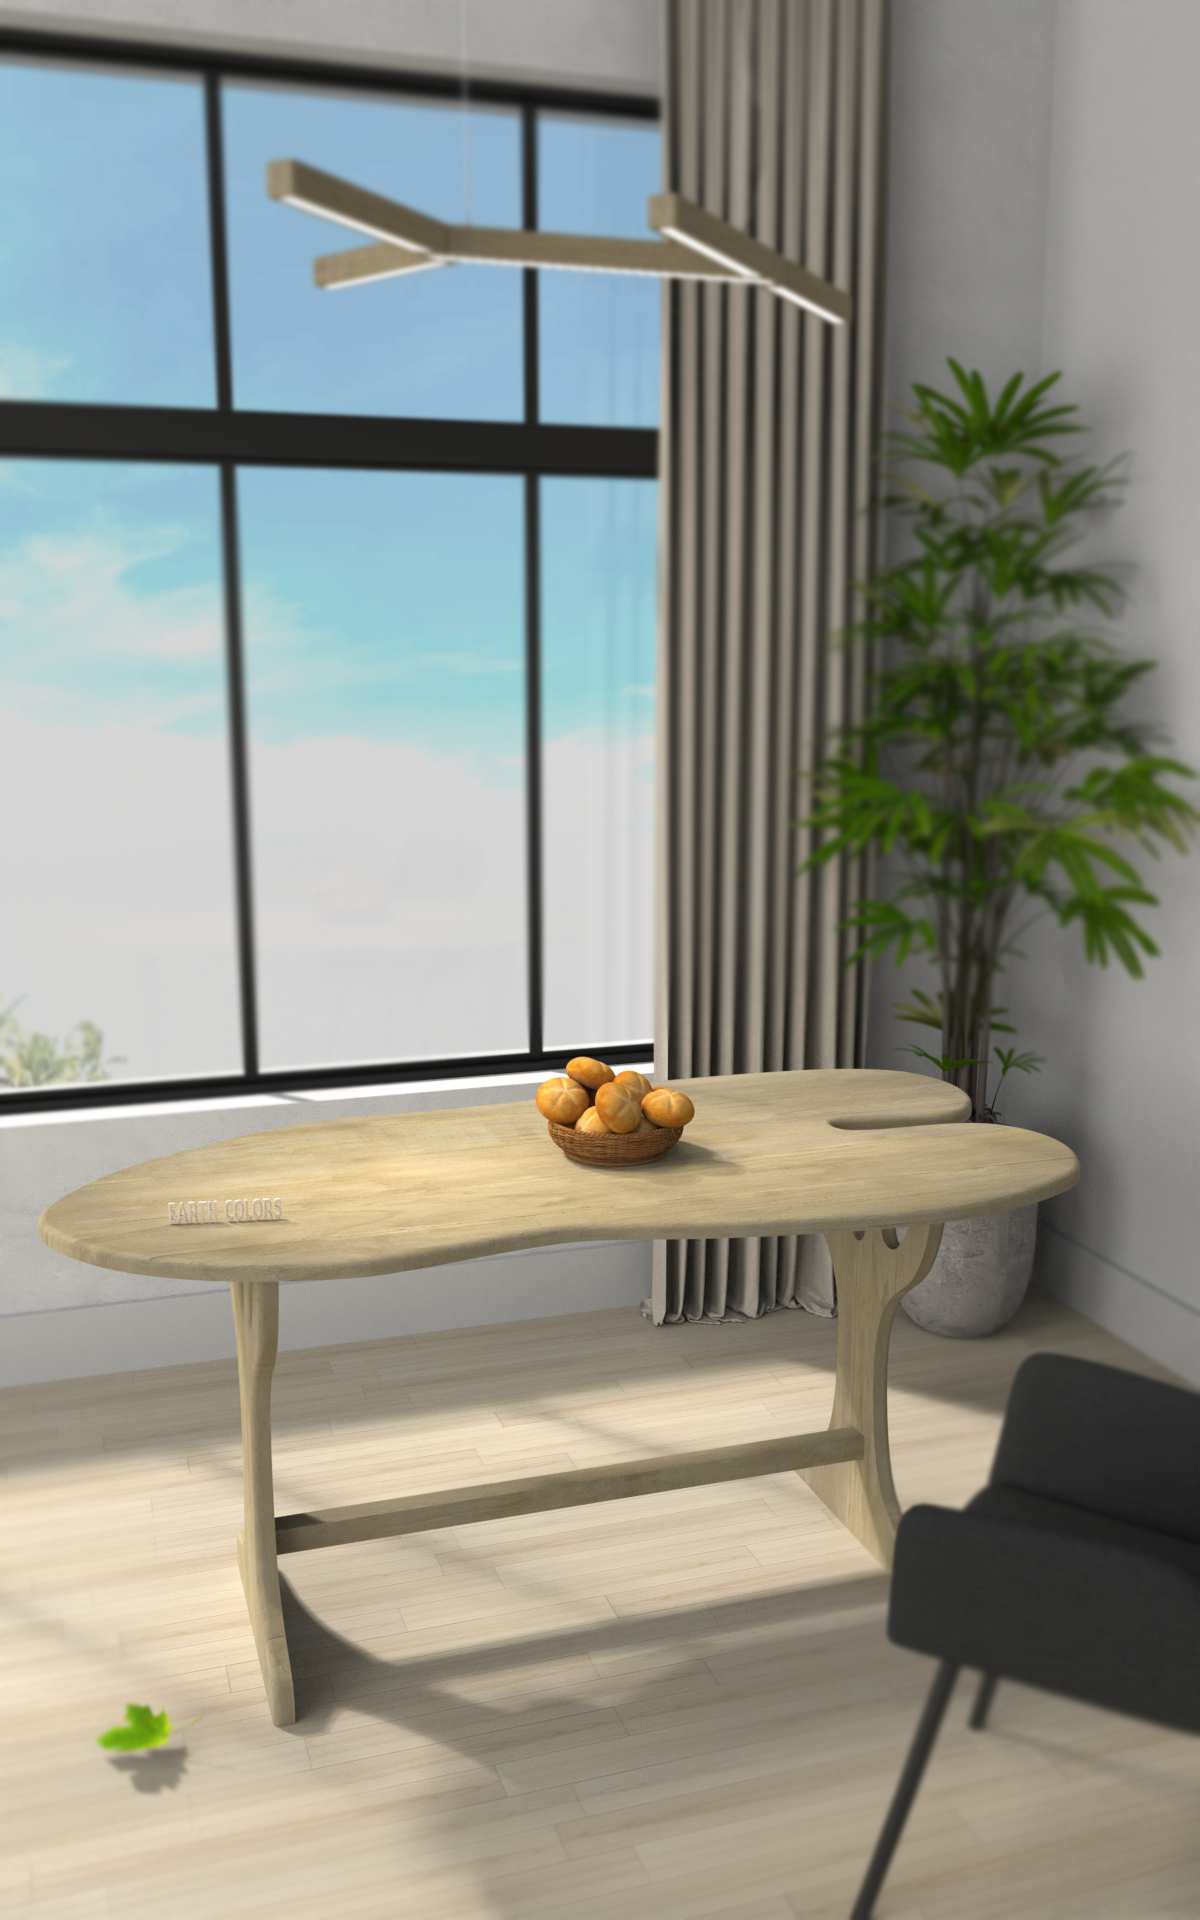 Wooden street dining table